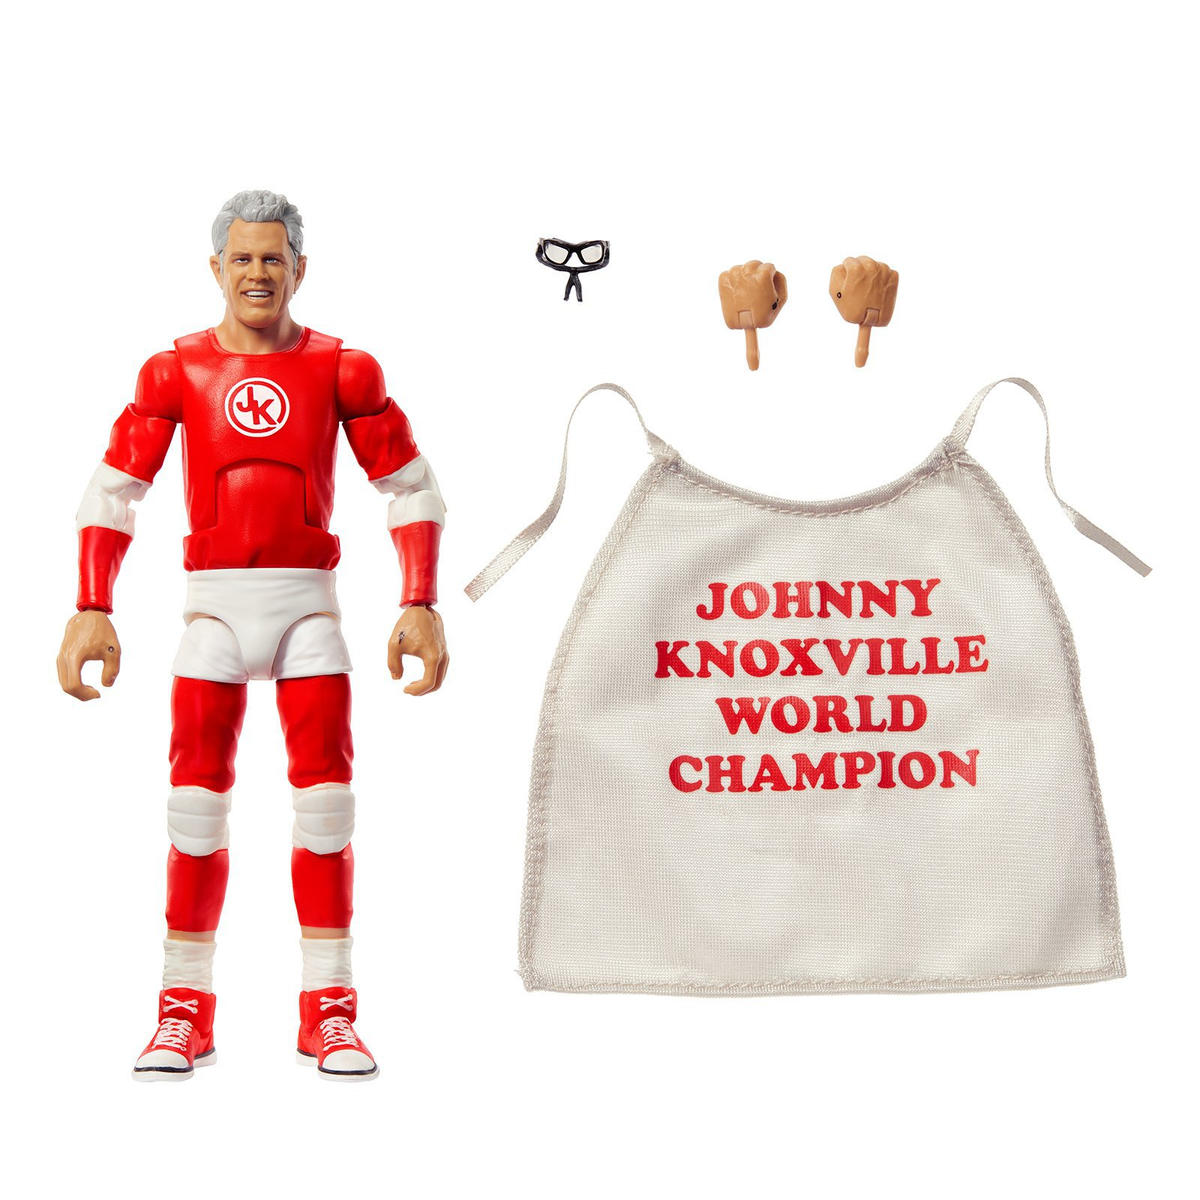 2023 WWE Mattel Elite Collection Series 101 Johnny Knoxville